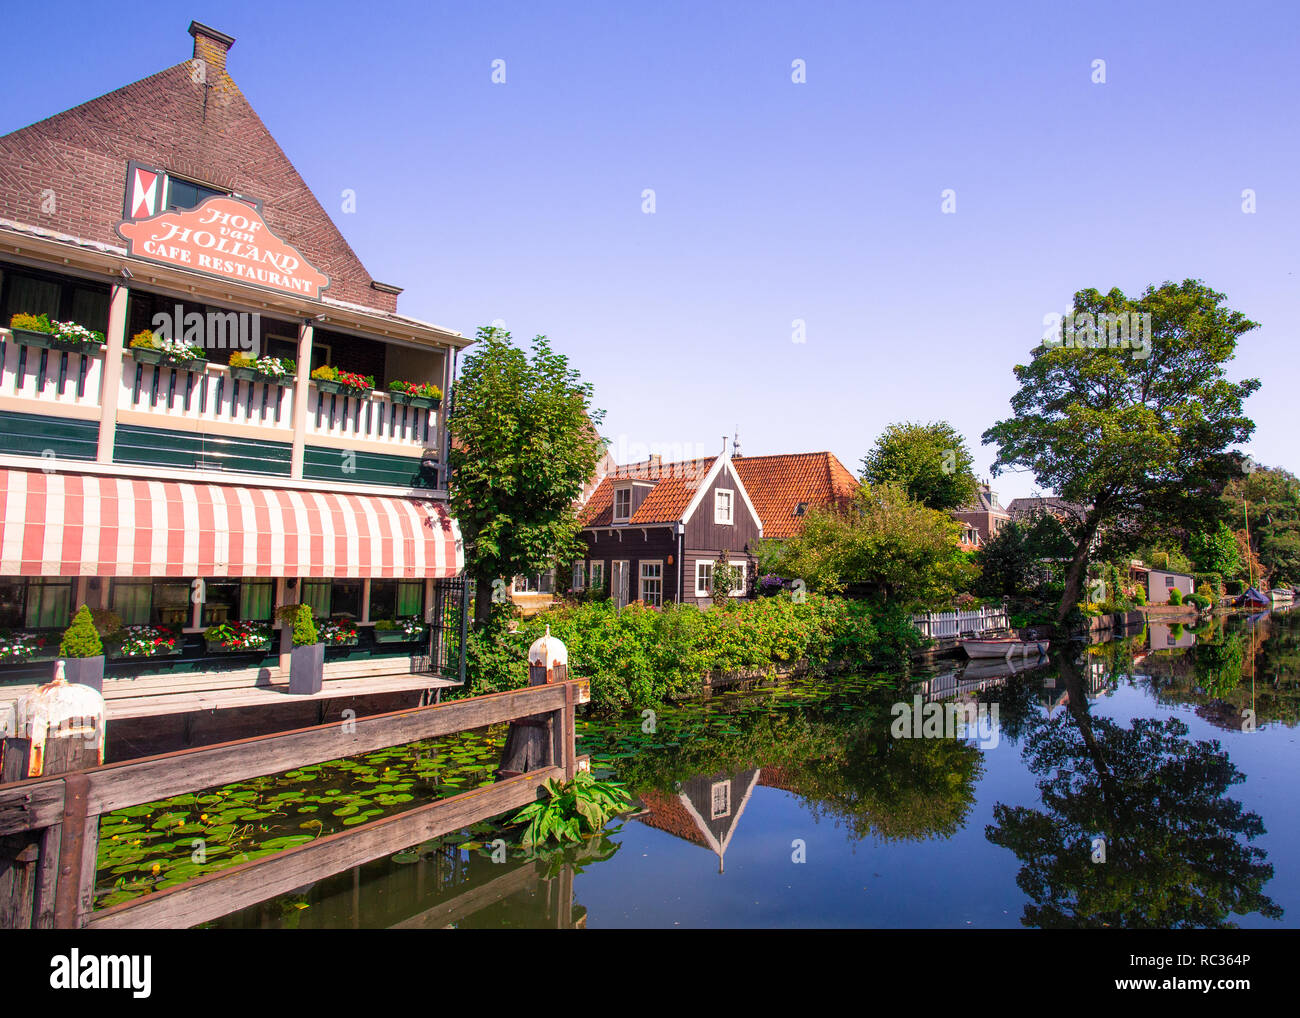 Scene from picturesque cheese-making town of Edam, Holland with historic architecture and canal Stock Photo